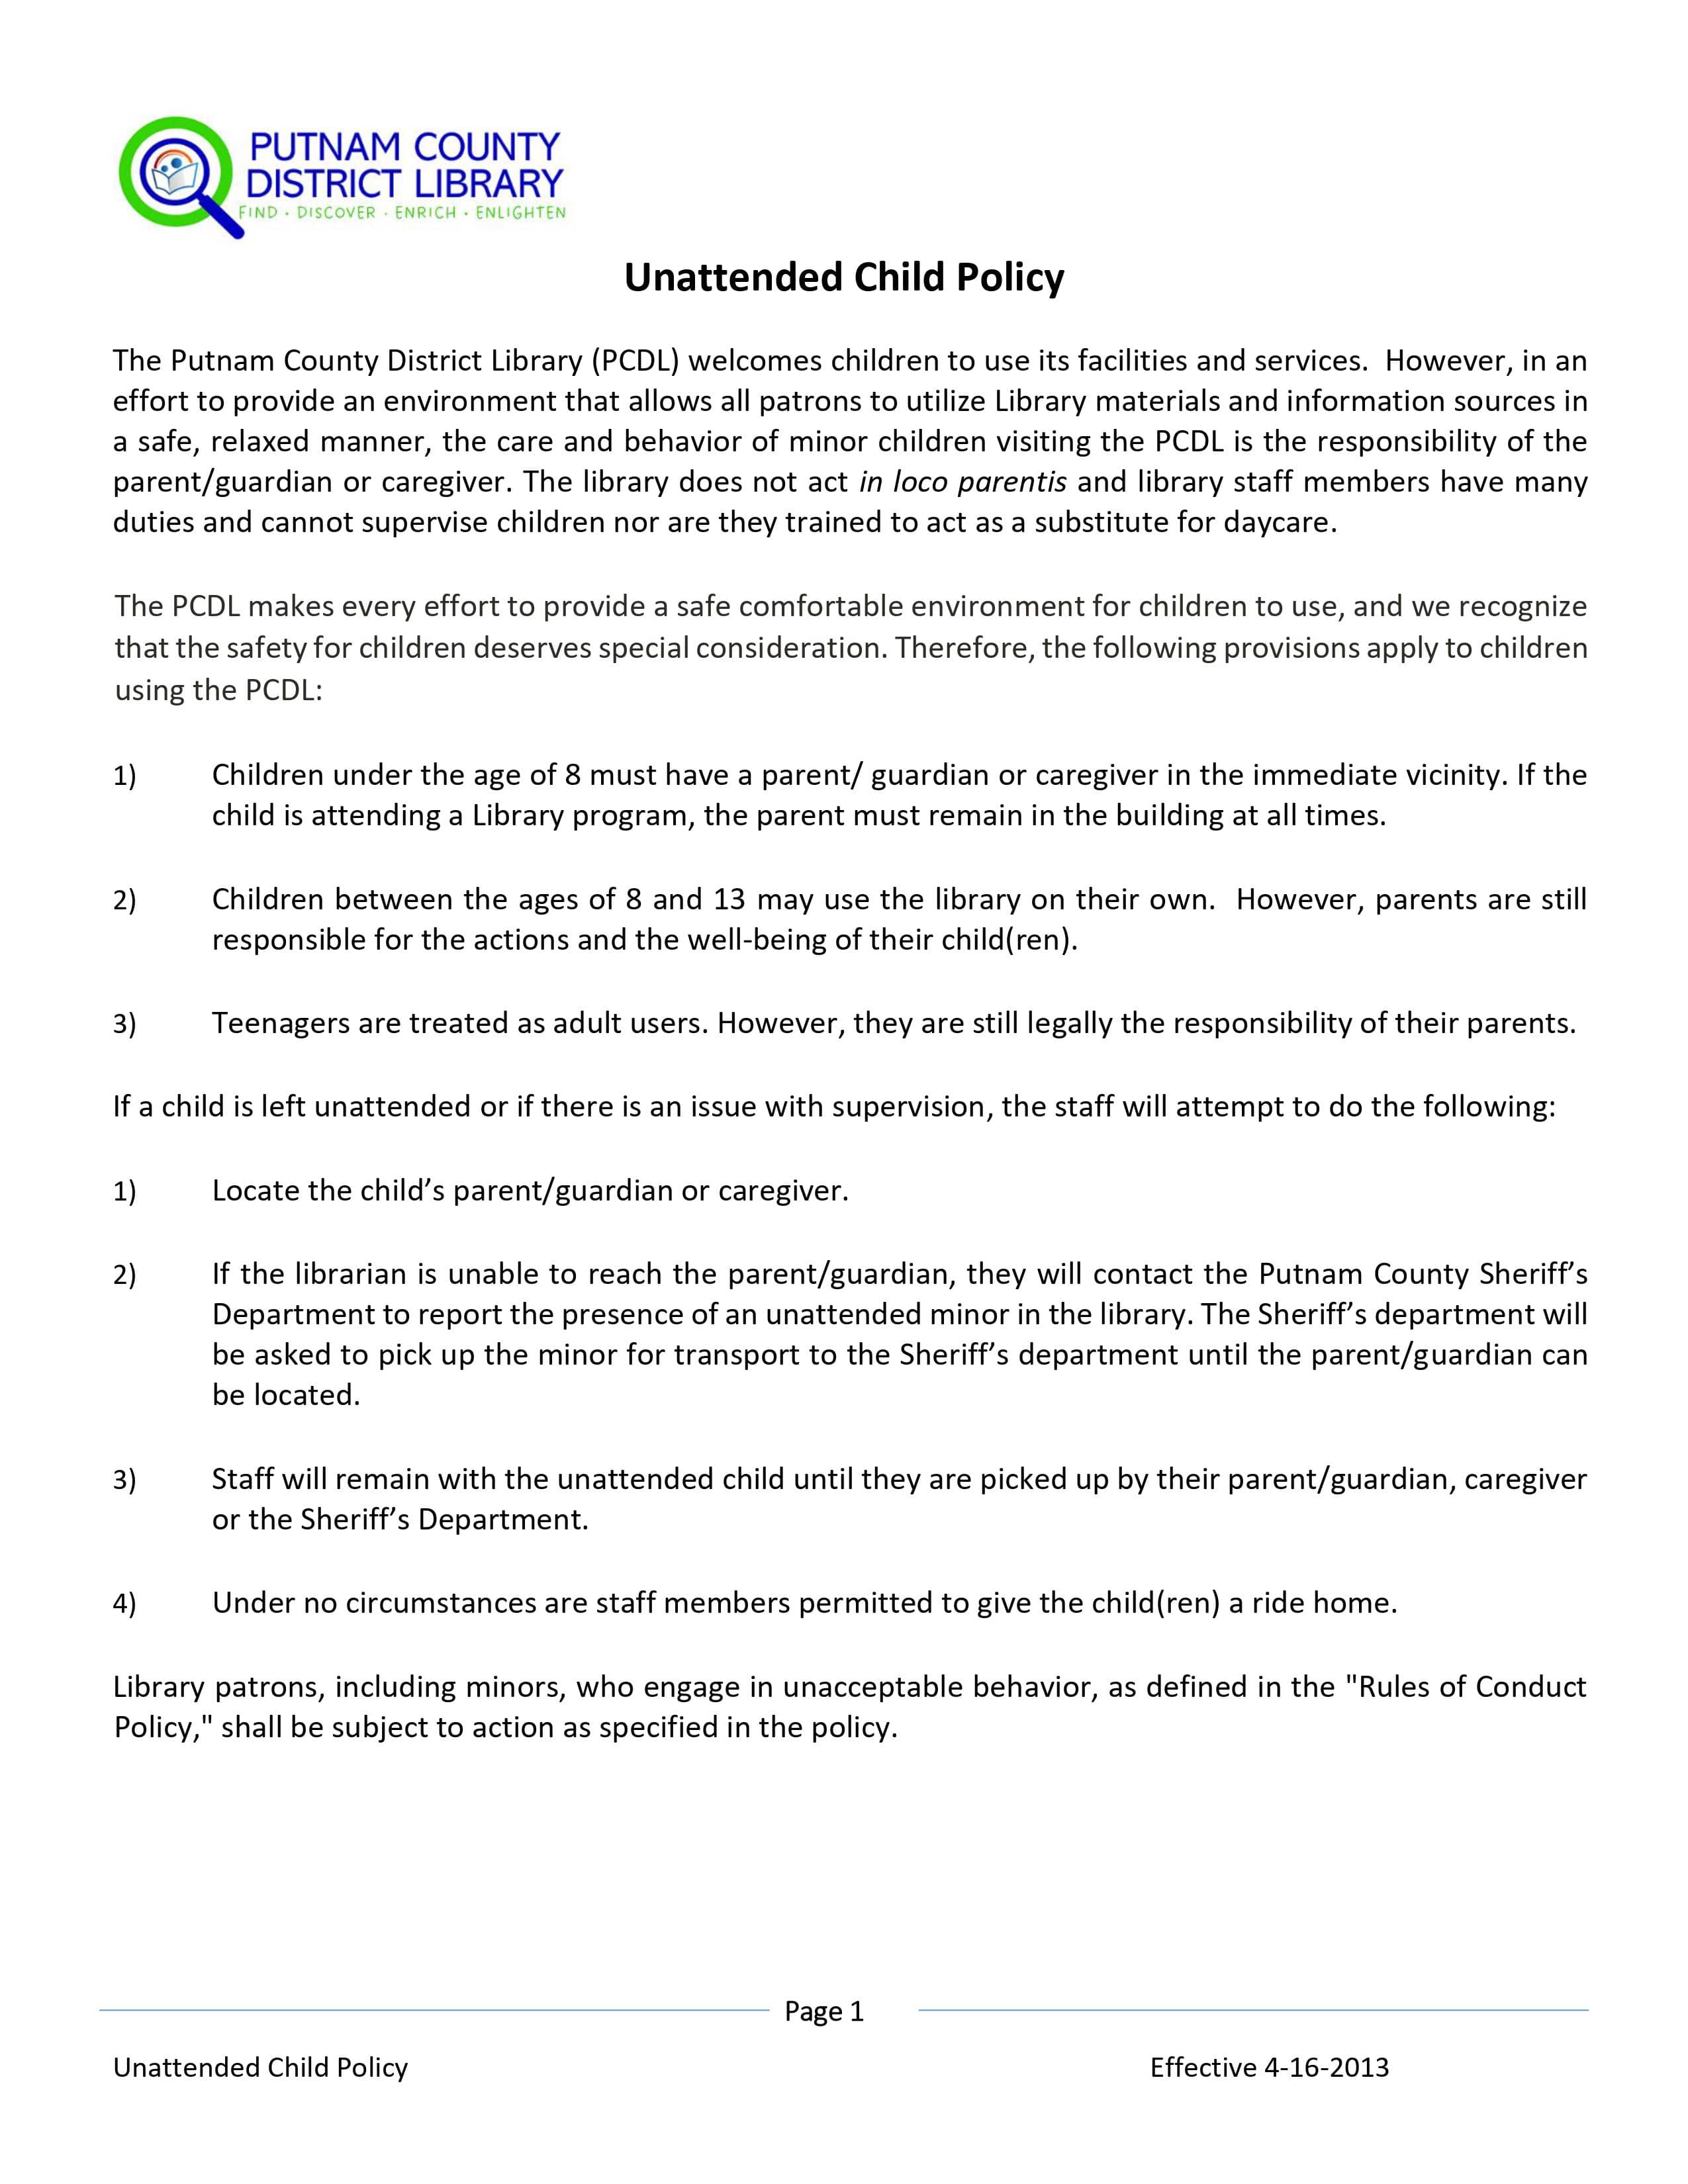 Unattened Children Policy call 419-523-3747 ext 3 for more information